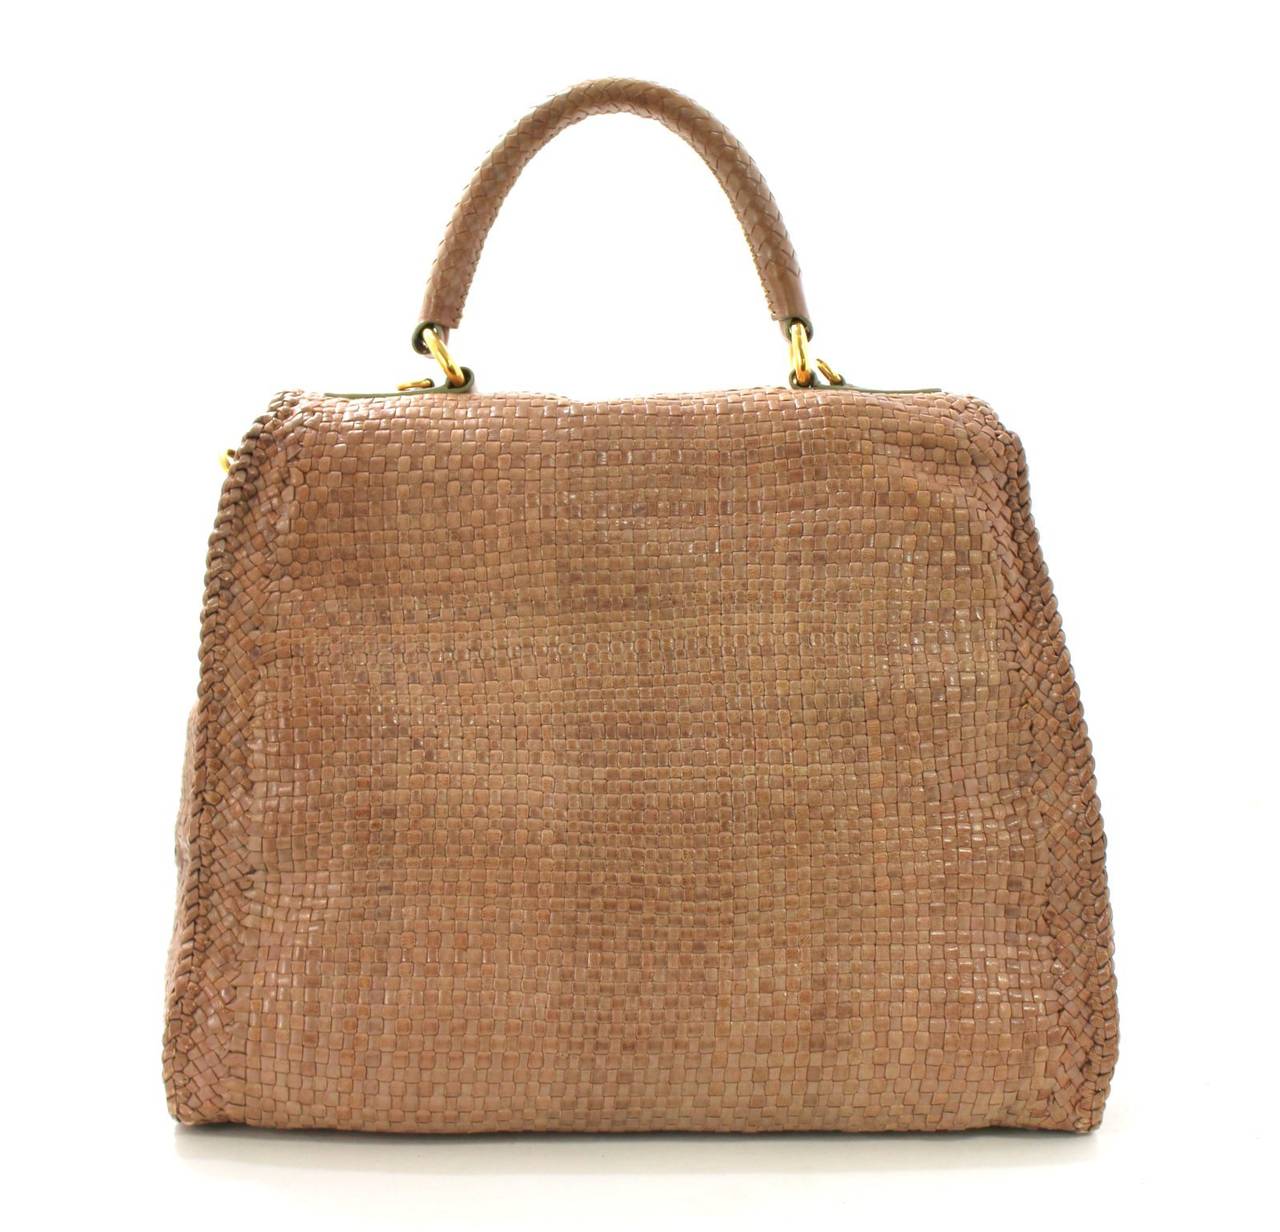 MINT condition, worn one time.  PRADA Agave Nude Goatskin Madras Top Handle Flap Bag- SOLD OUT
Beautifully unique PRADA is hand woven in neutral goatskin and may be carried as a top handle satchel or cross the body.
Warm nude and beige toned